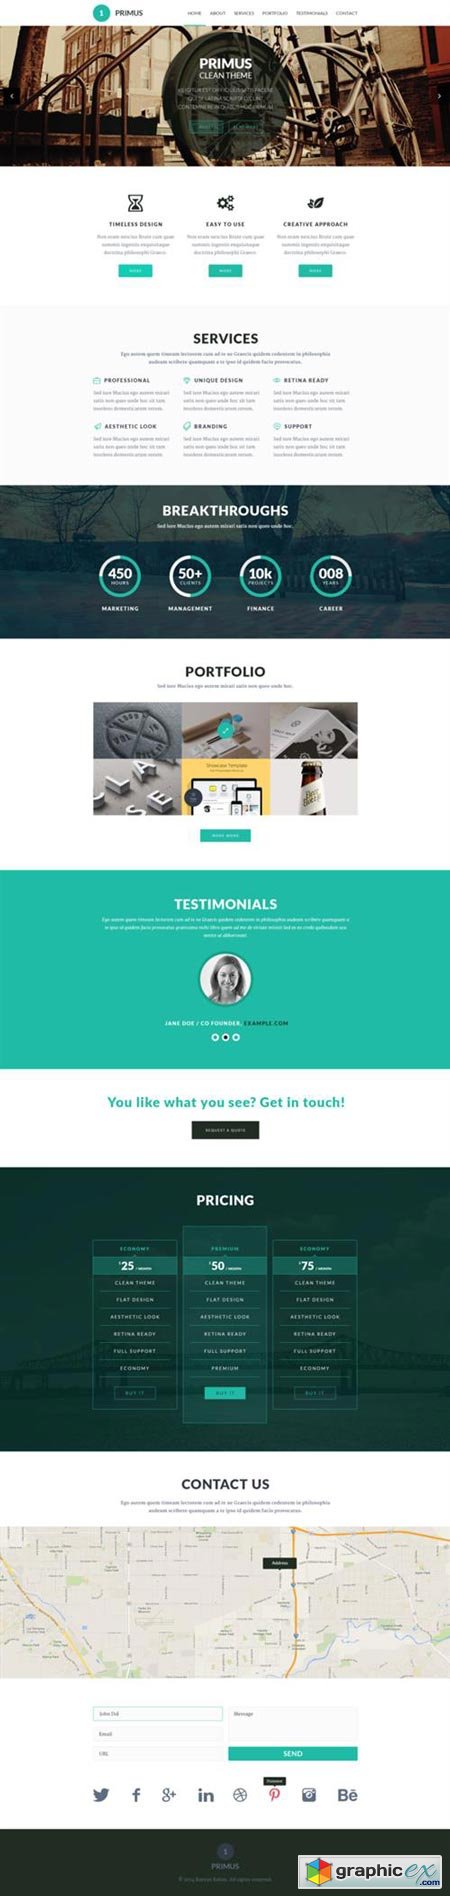 Primus - One Page Parallax Template